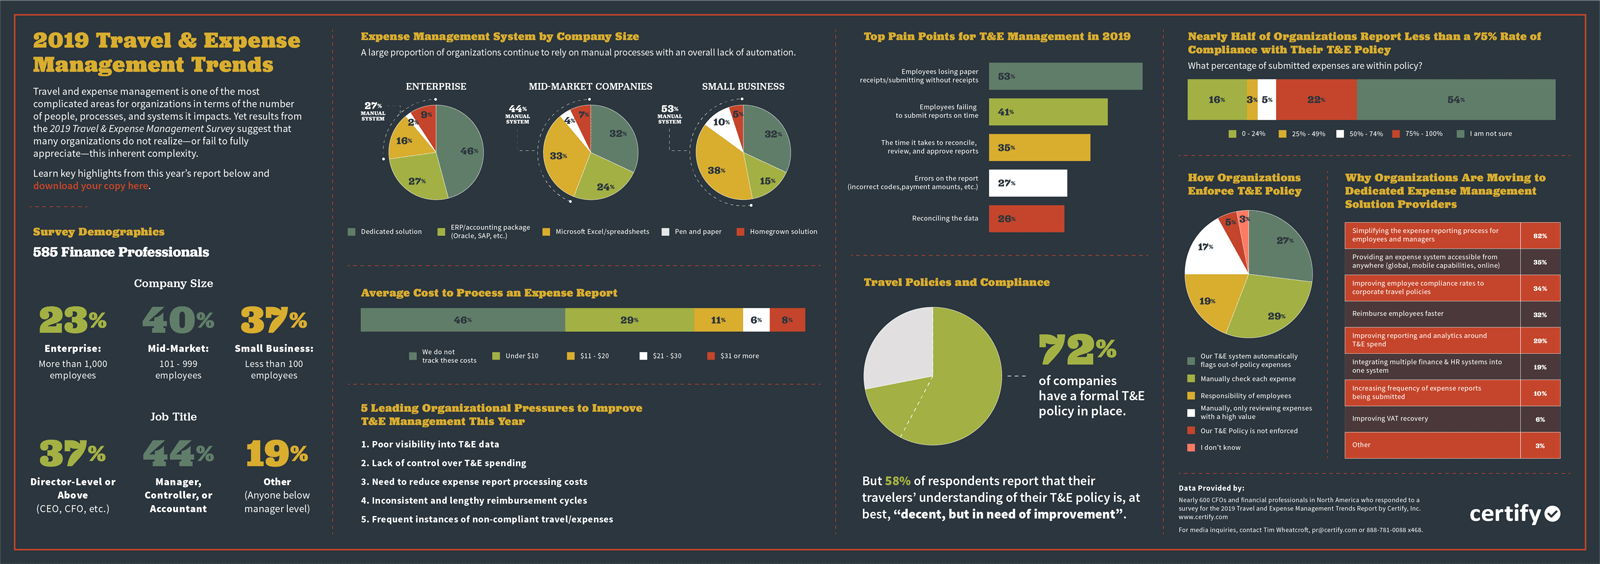 2019 Travel and Expense Management Trends Report infographic